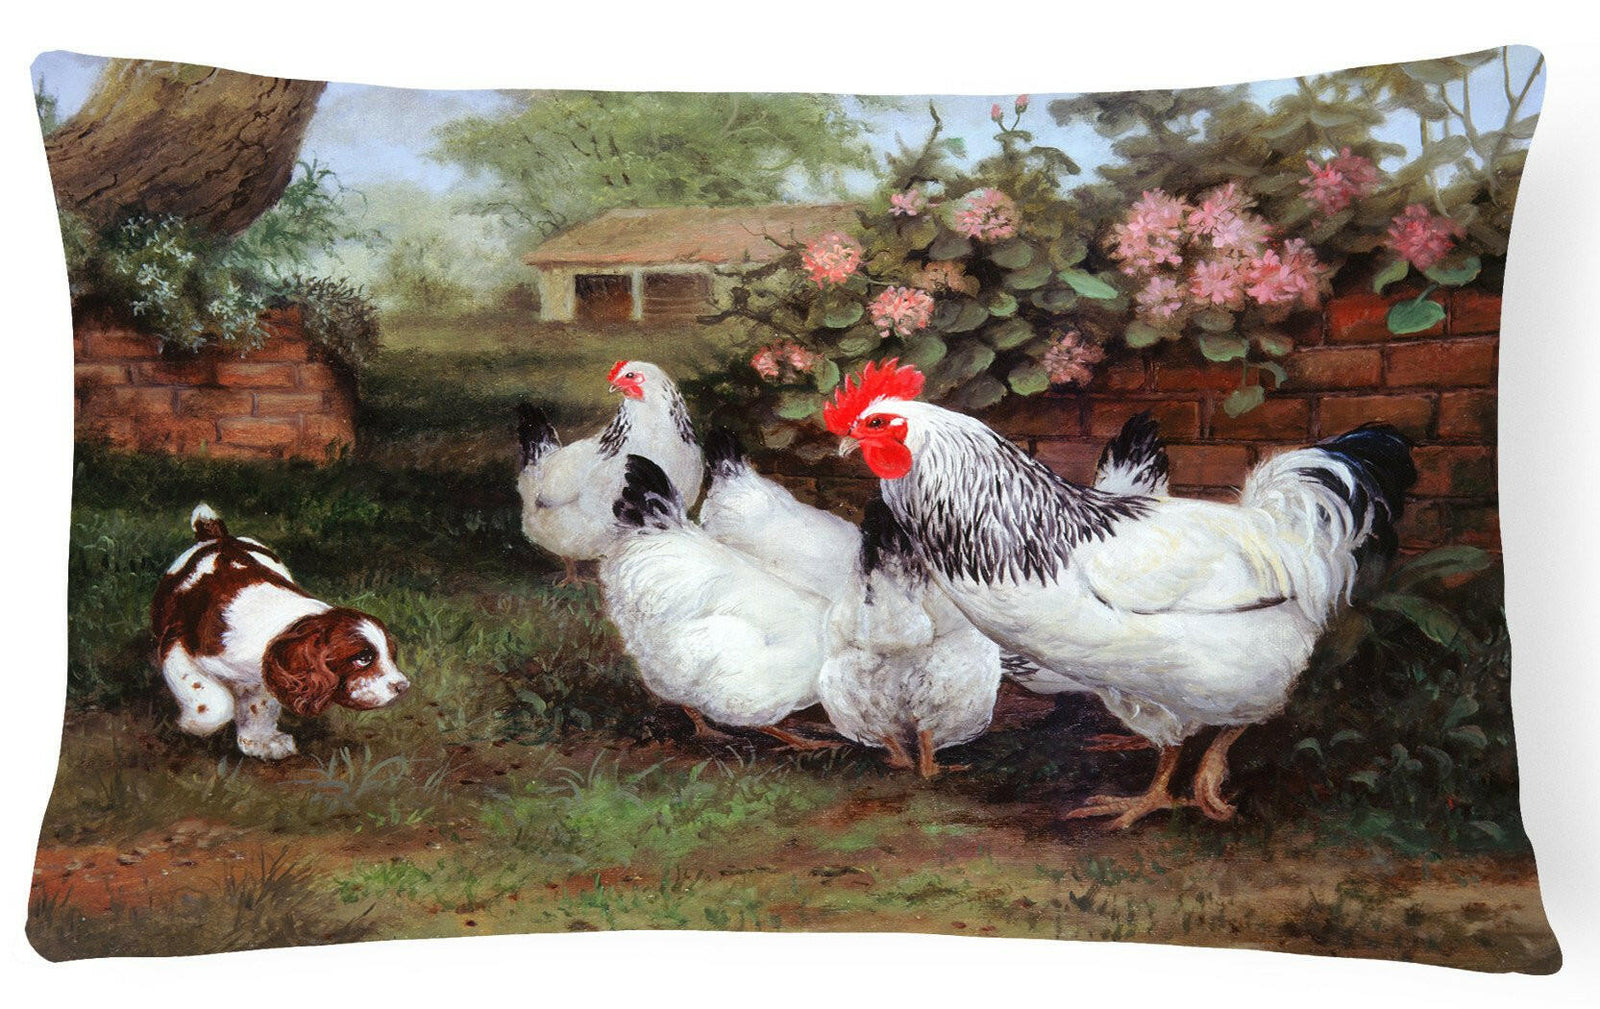 Chickens, Hens and Puppy Fabric Decorative Pillow HEH0003PW1216 by Caroline's Treasures